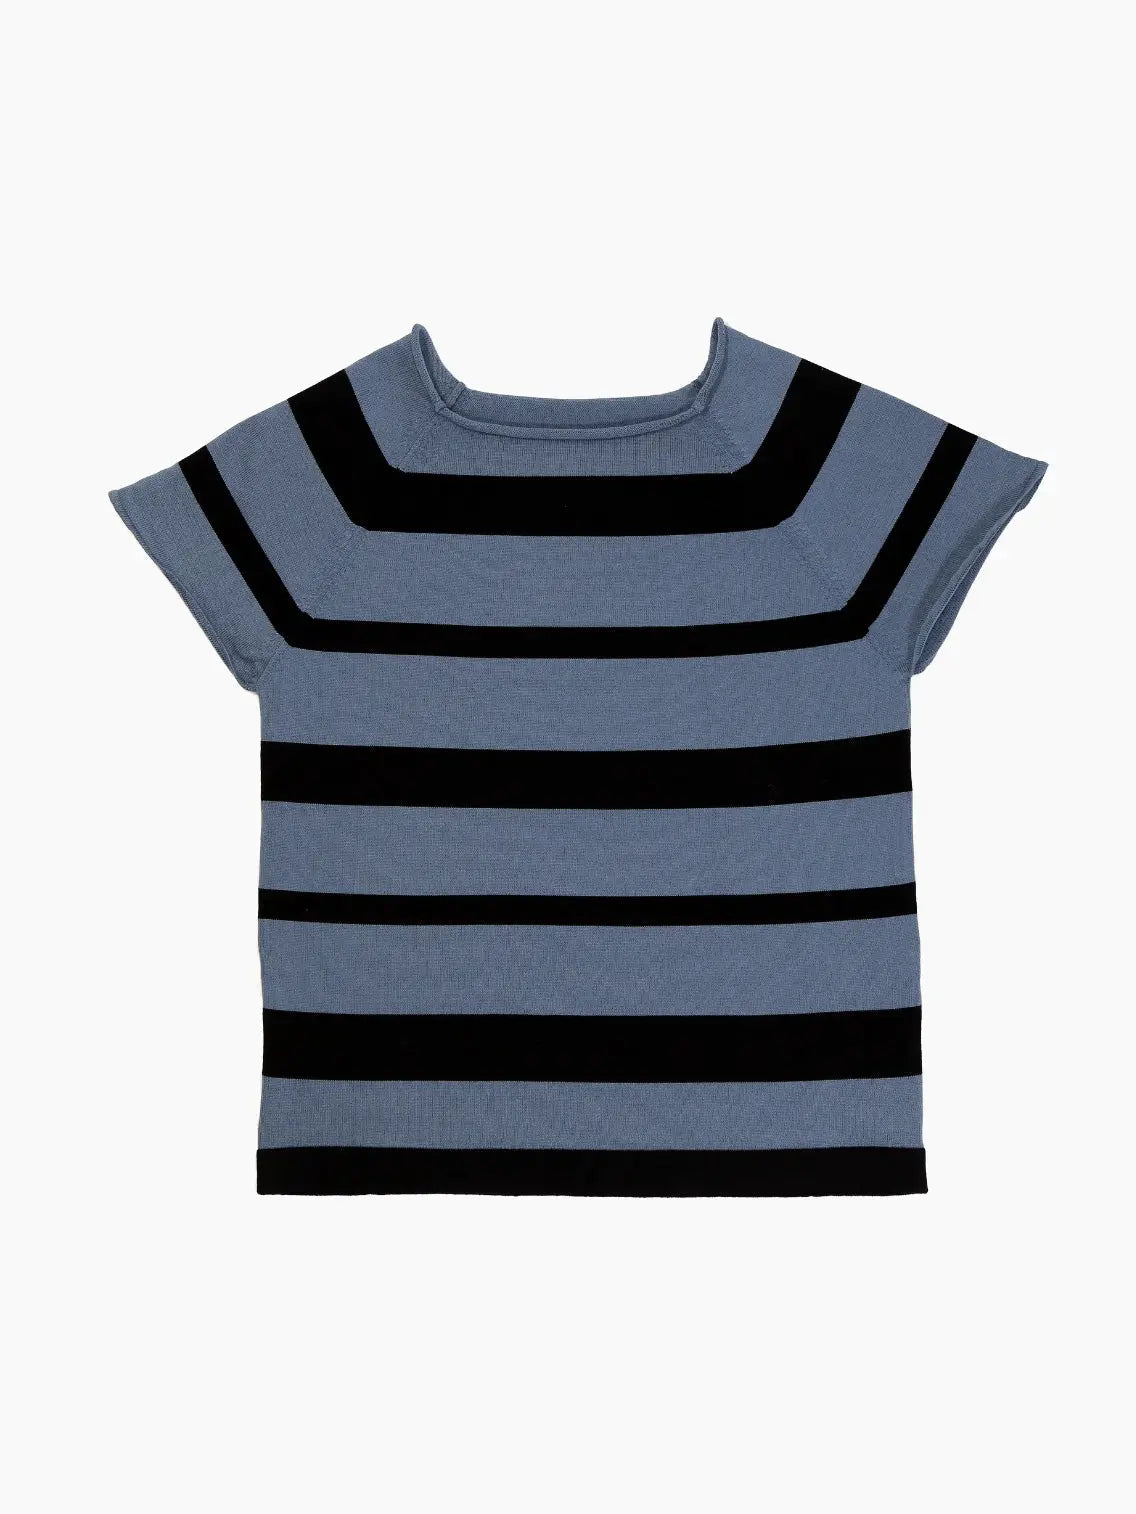 A blue short-sleeved knit top featuring horizontal black stripes of varying thickness. The top has a round neckline and a slightly relaxed fit, perfect for strolling through Barcelona. Available at Bassalstore, this stylish piece stands out against the white background. Introducing the Blow T-Shirt Bleu/Black by Bielo.